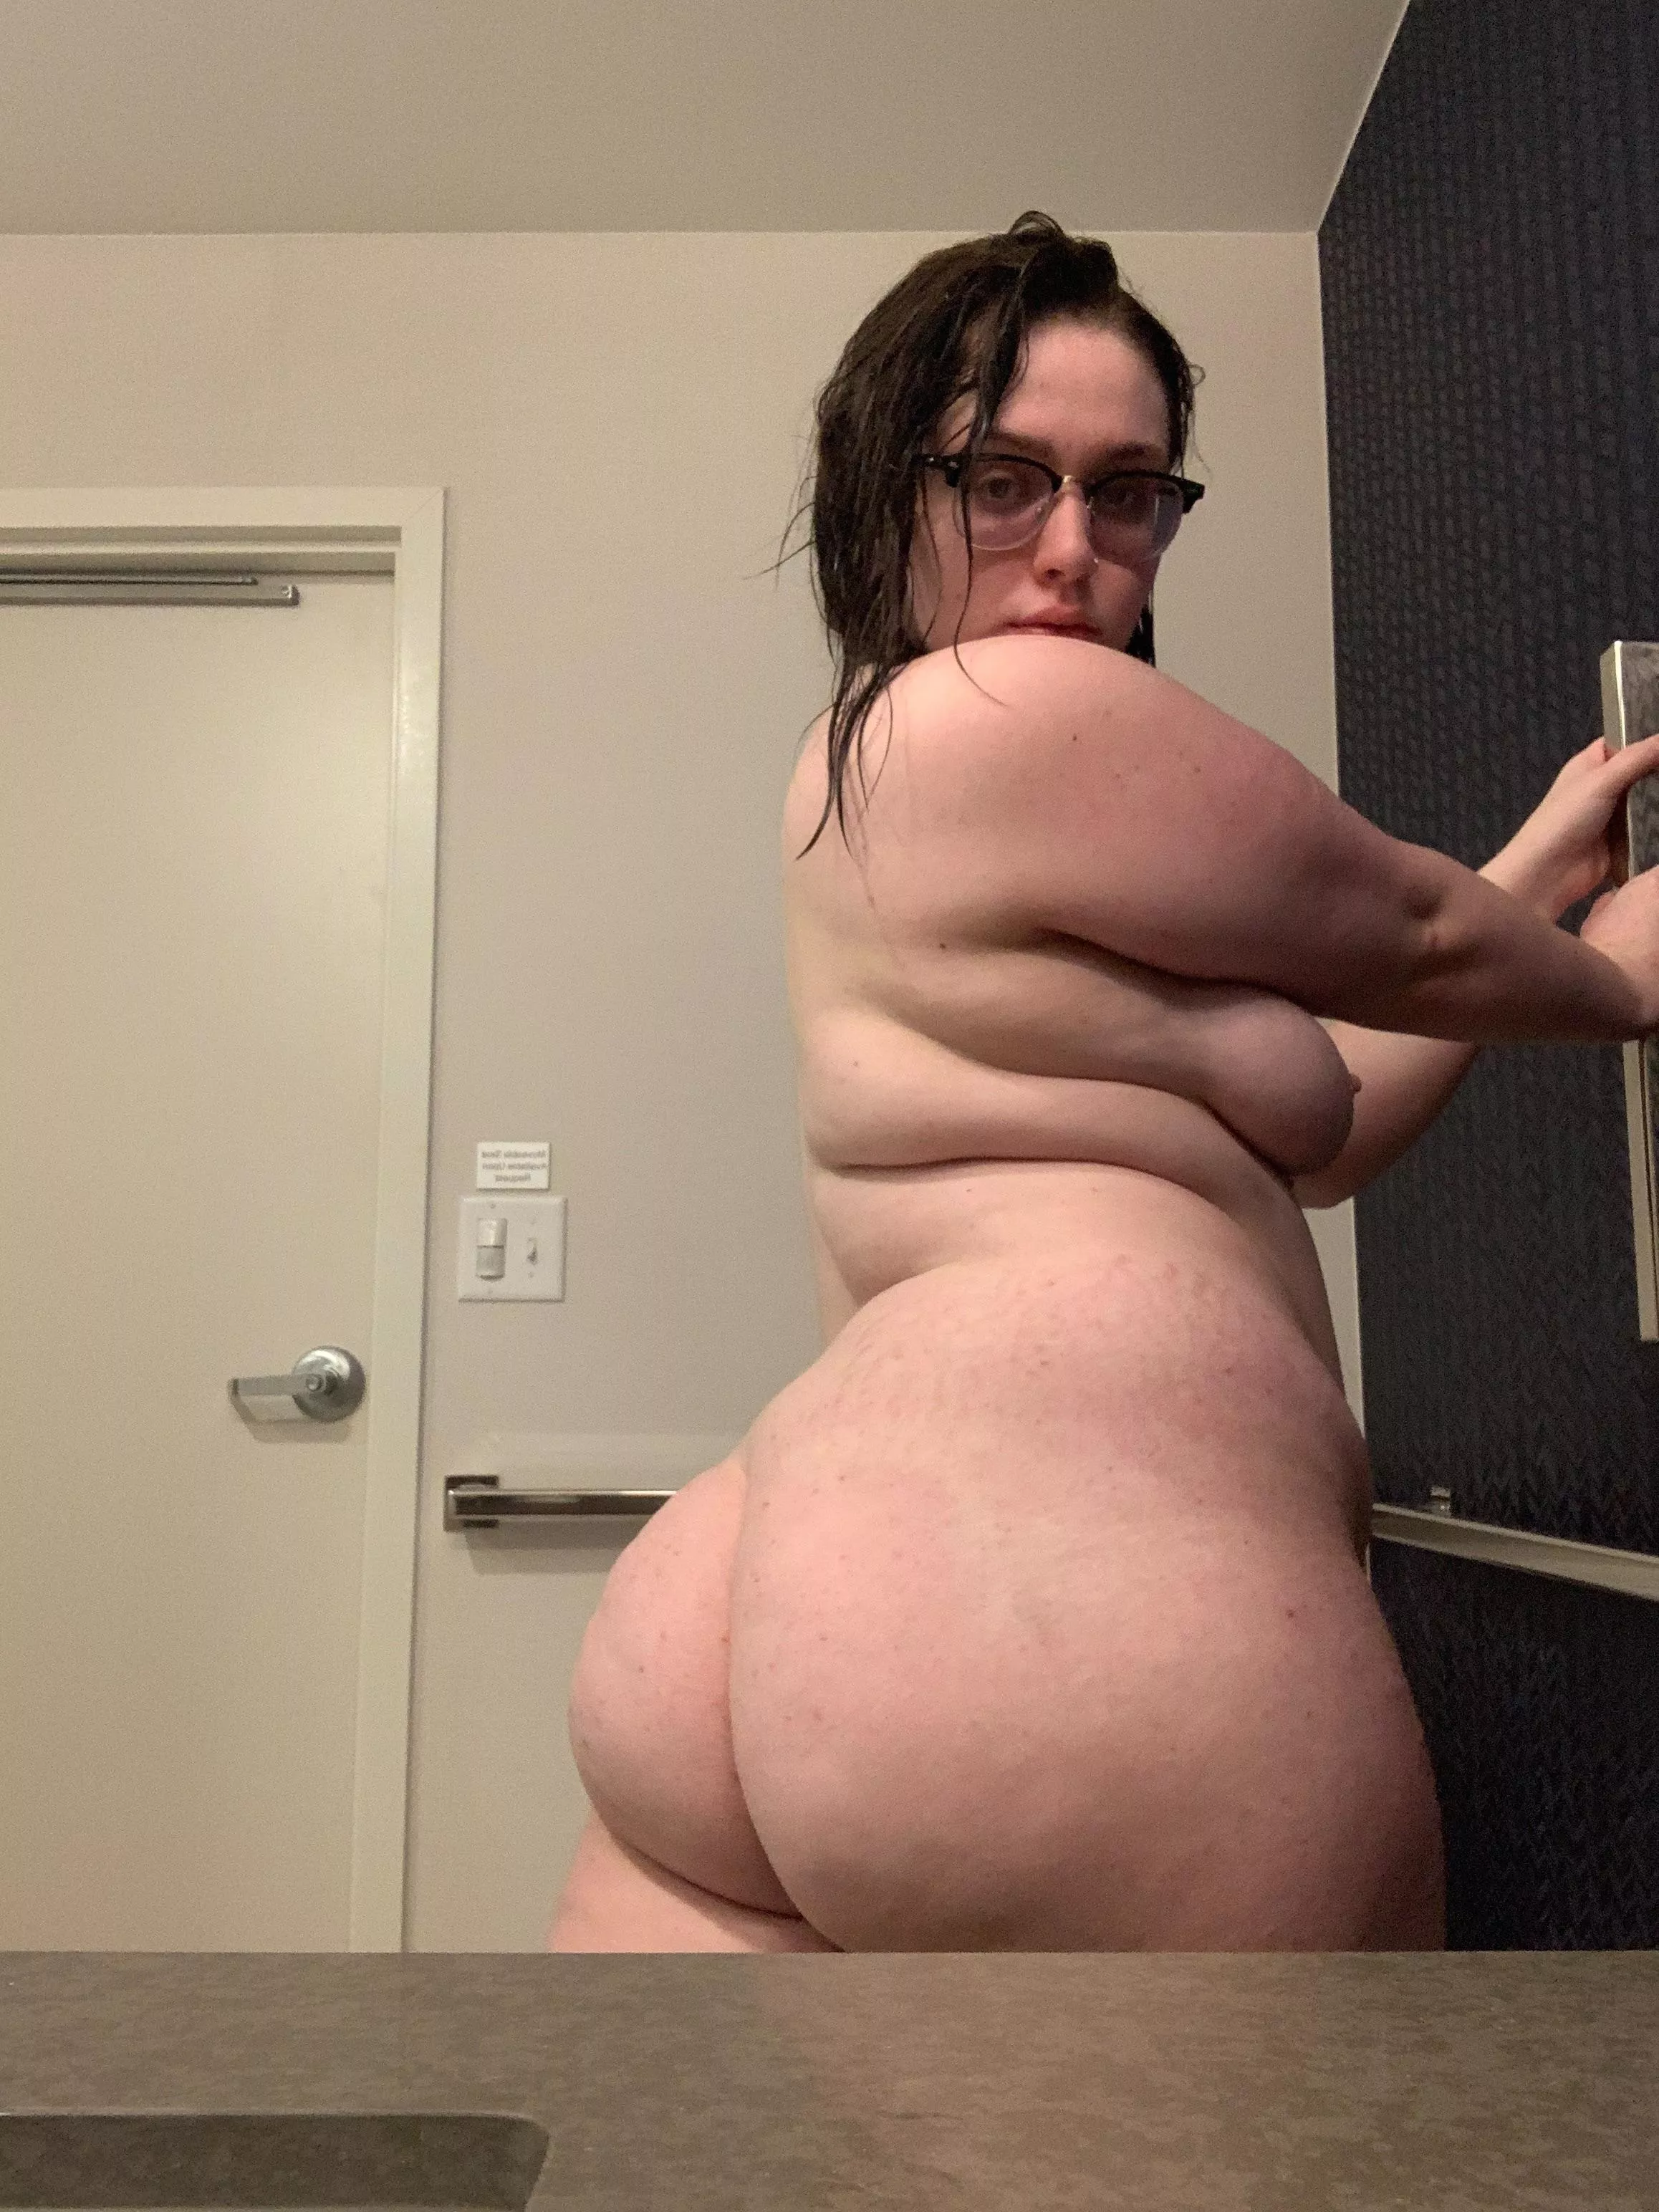 This thick ass needs some cock nudes in AmazingCurves Onlynudes pic picture